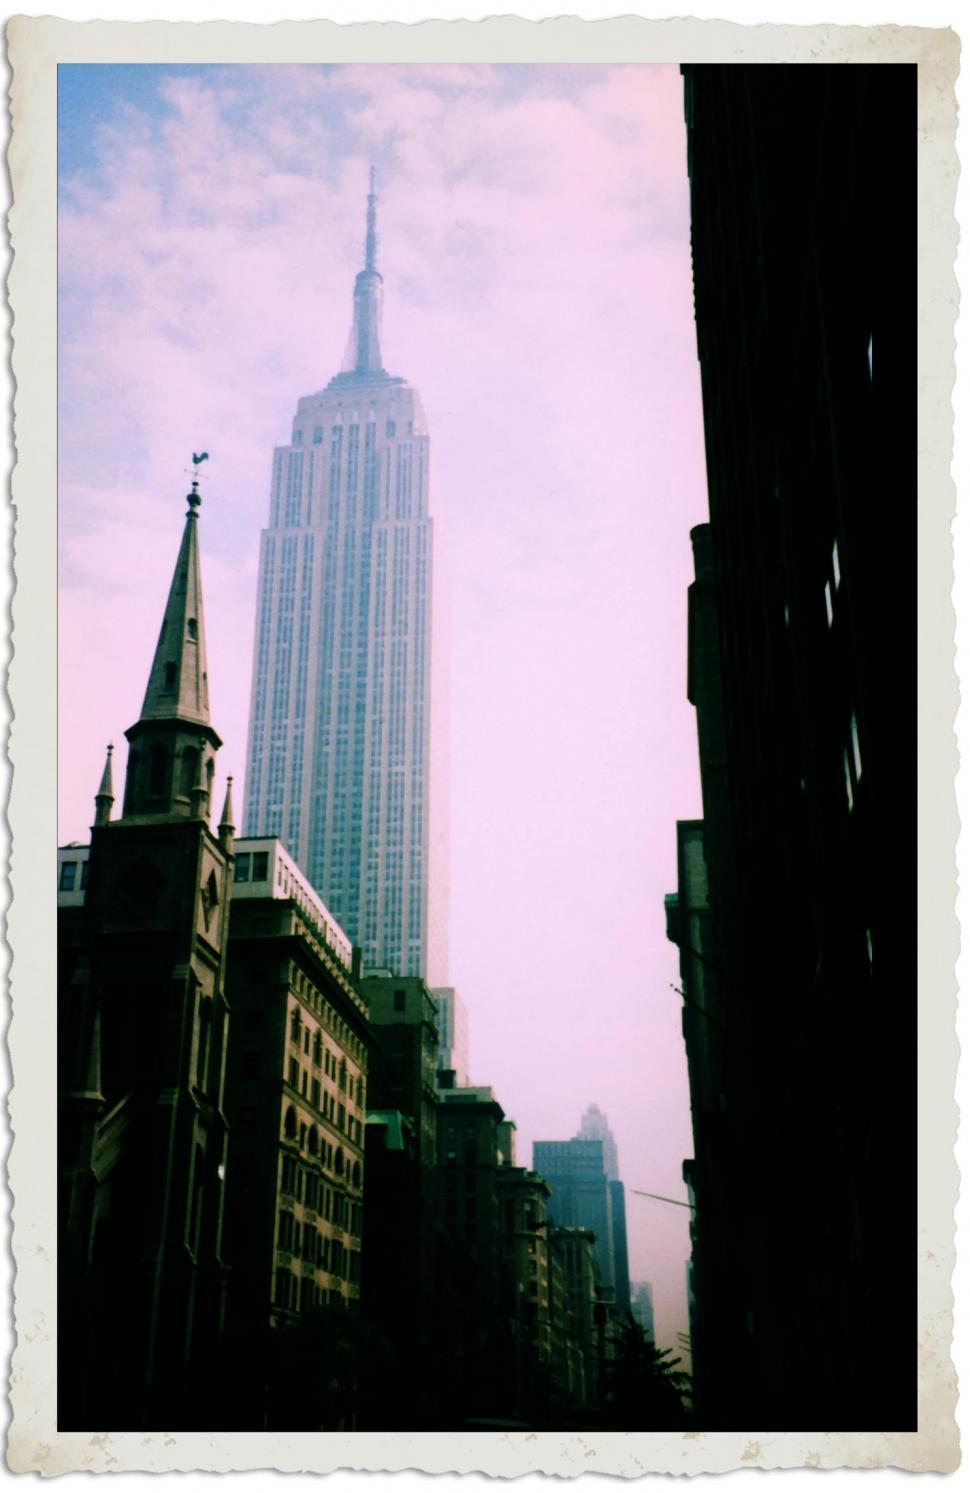 Free Image of Empire State Building 